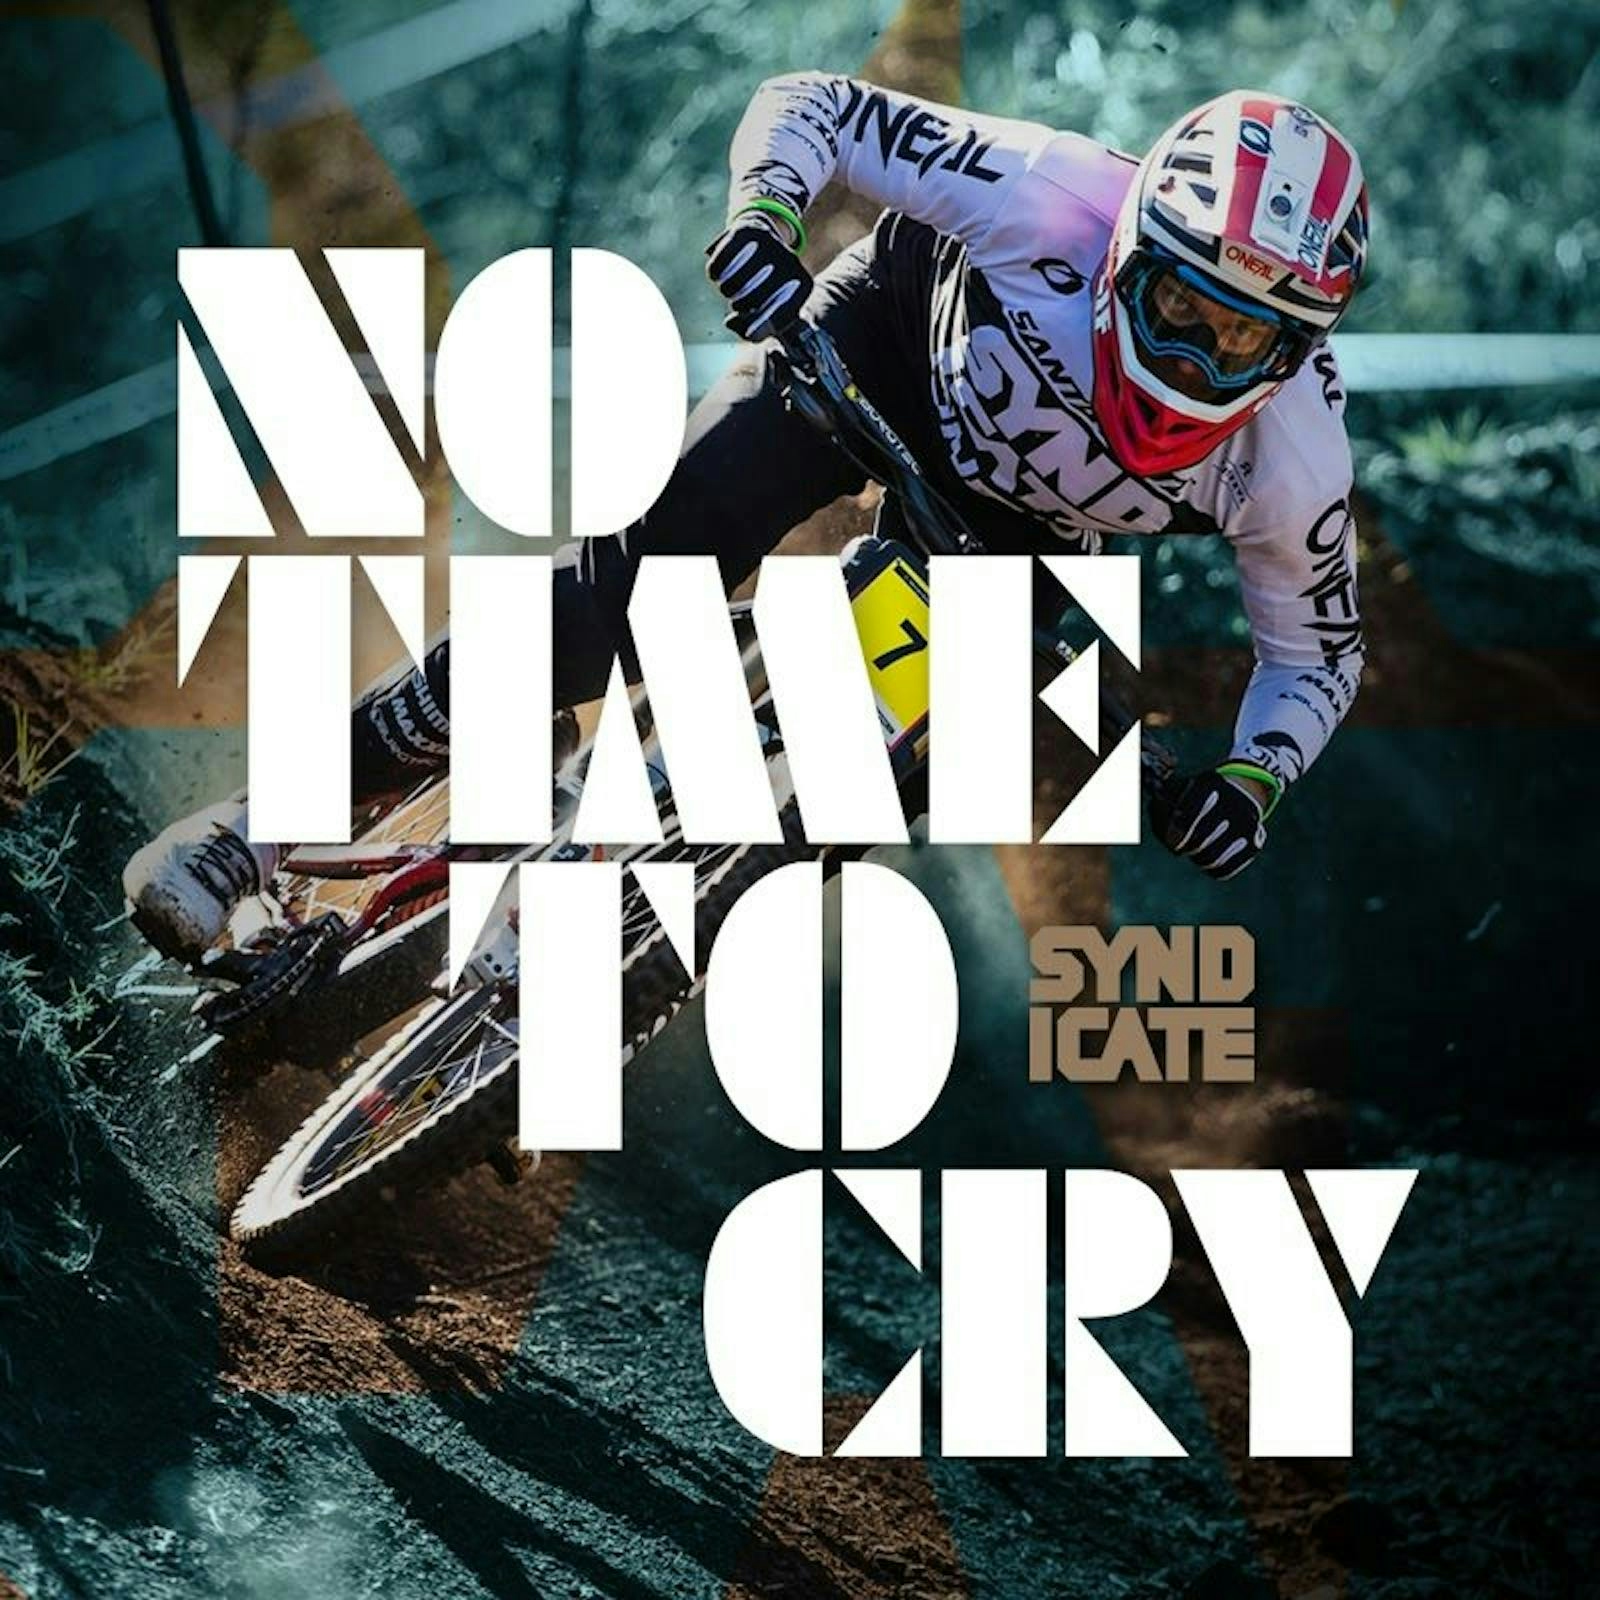 No Time to Cry Poster, with Greg Minnaar racing downhill